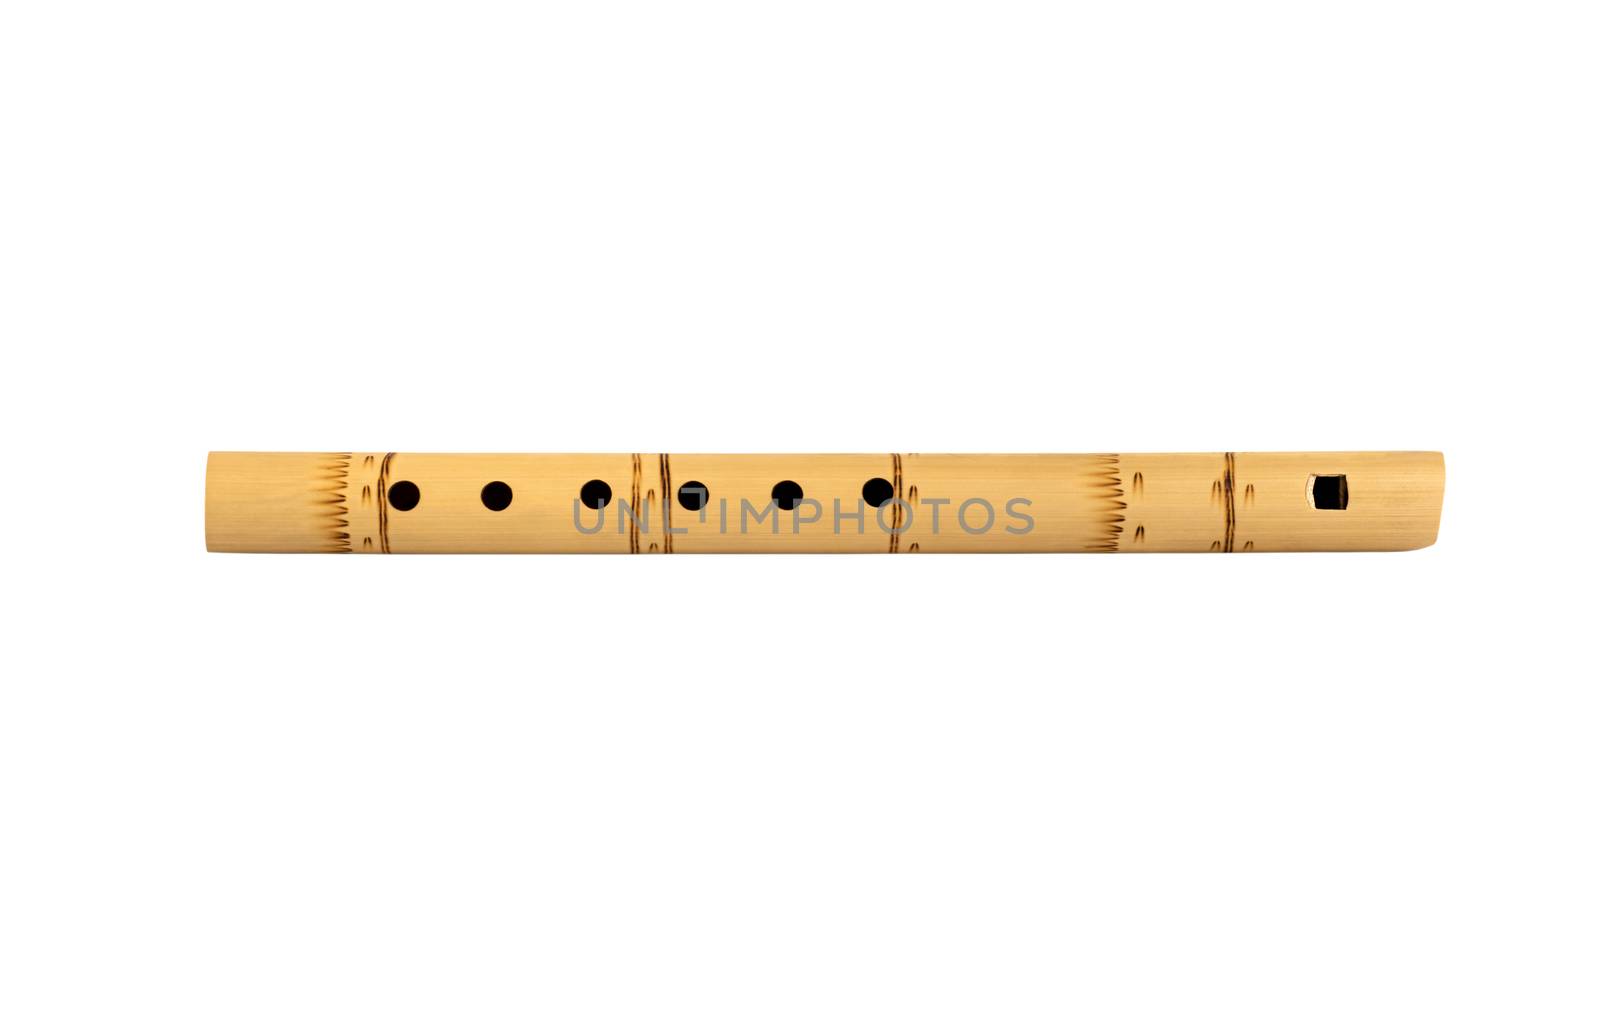 Flute isolated on white. Traditional wind musical instrument of Latin America. Bamboo flute block. Ken's whistle flute.